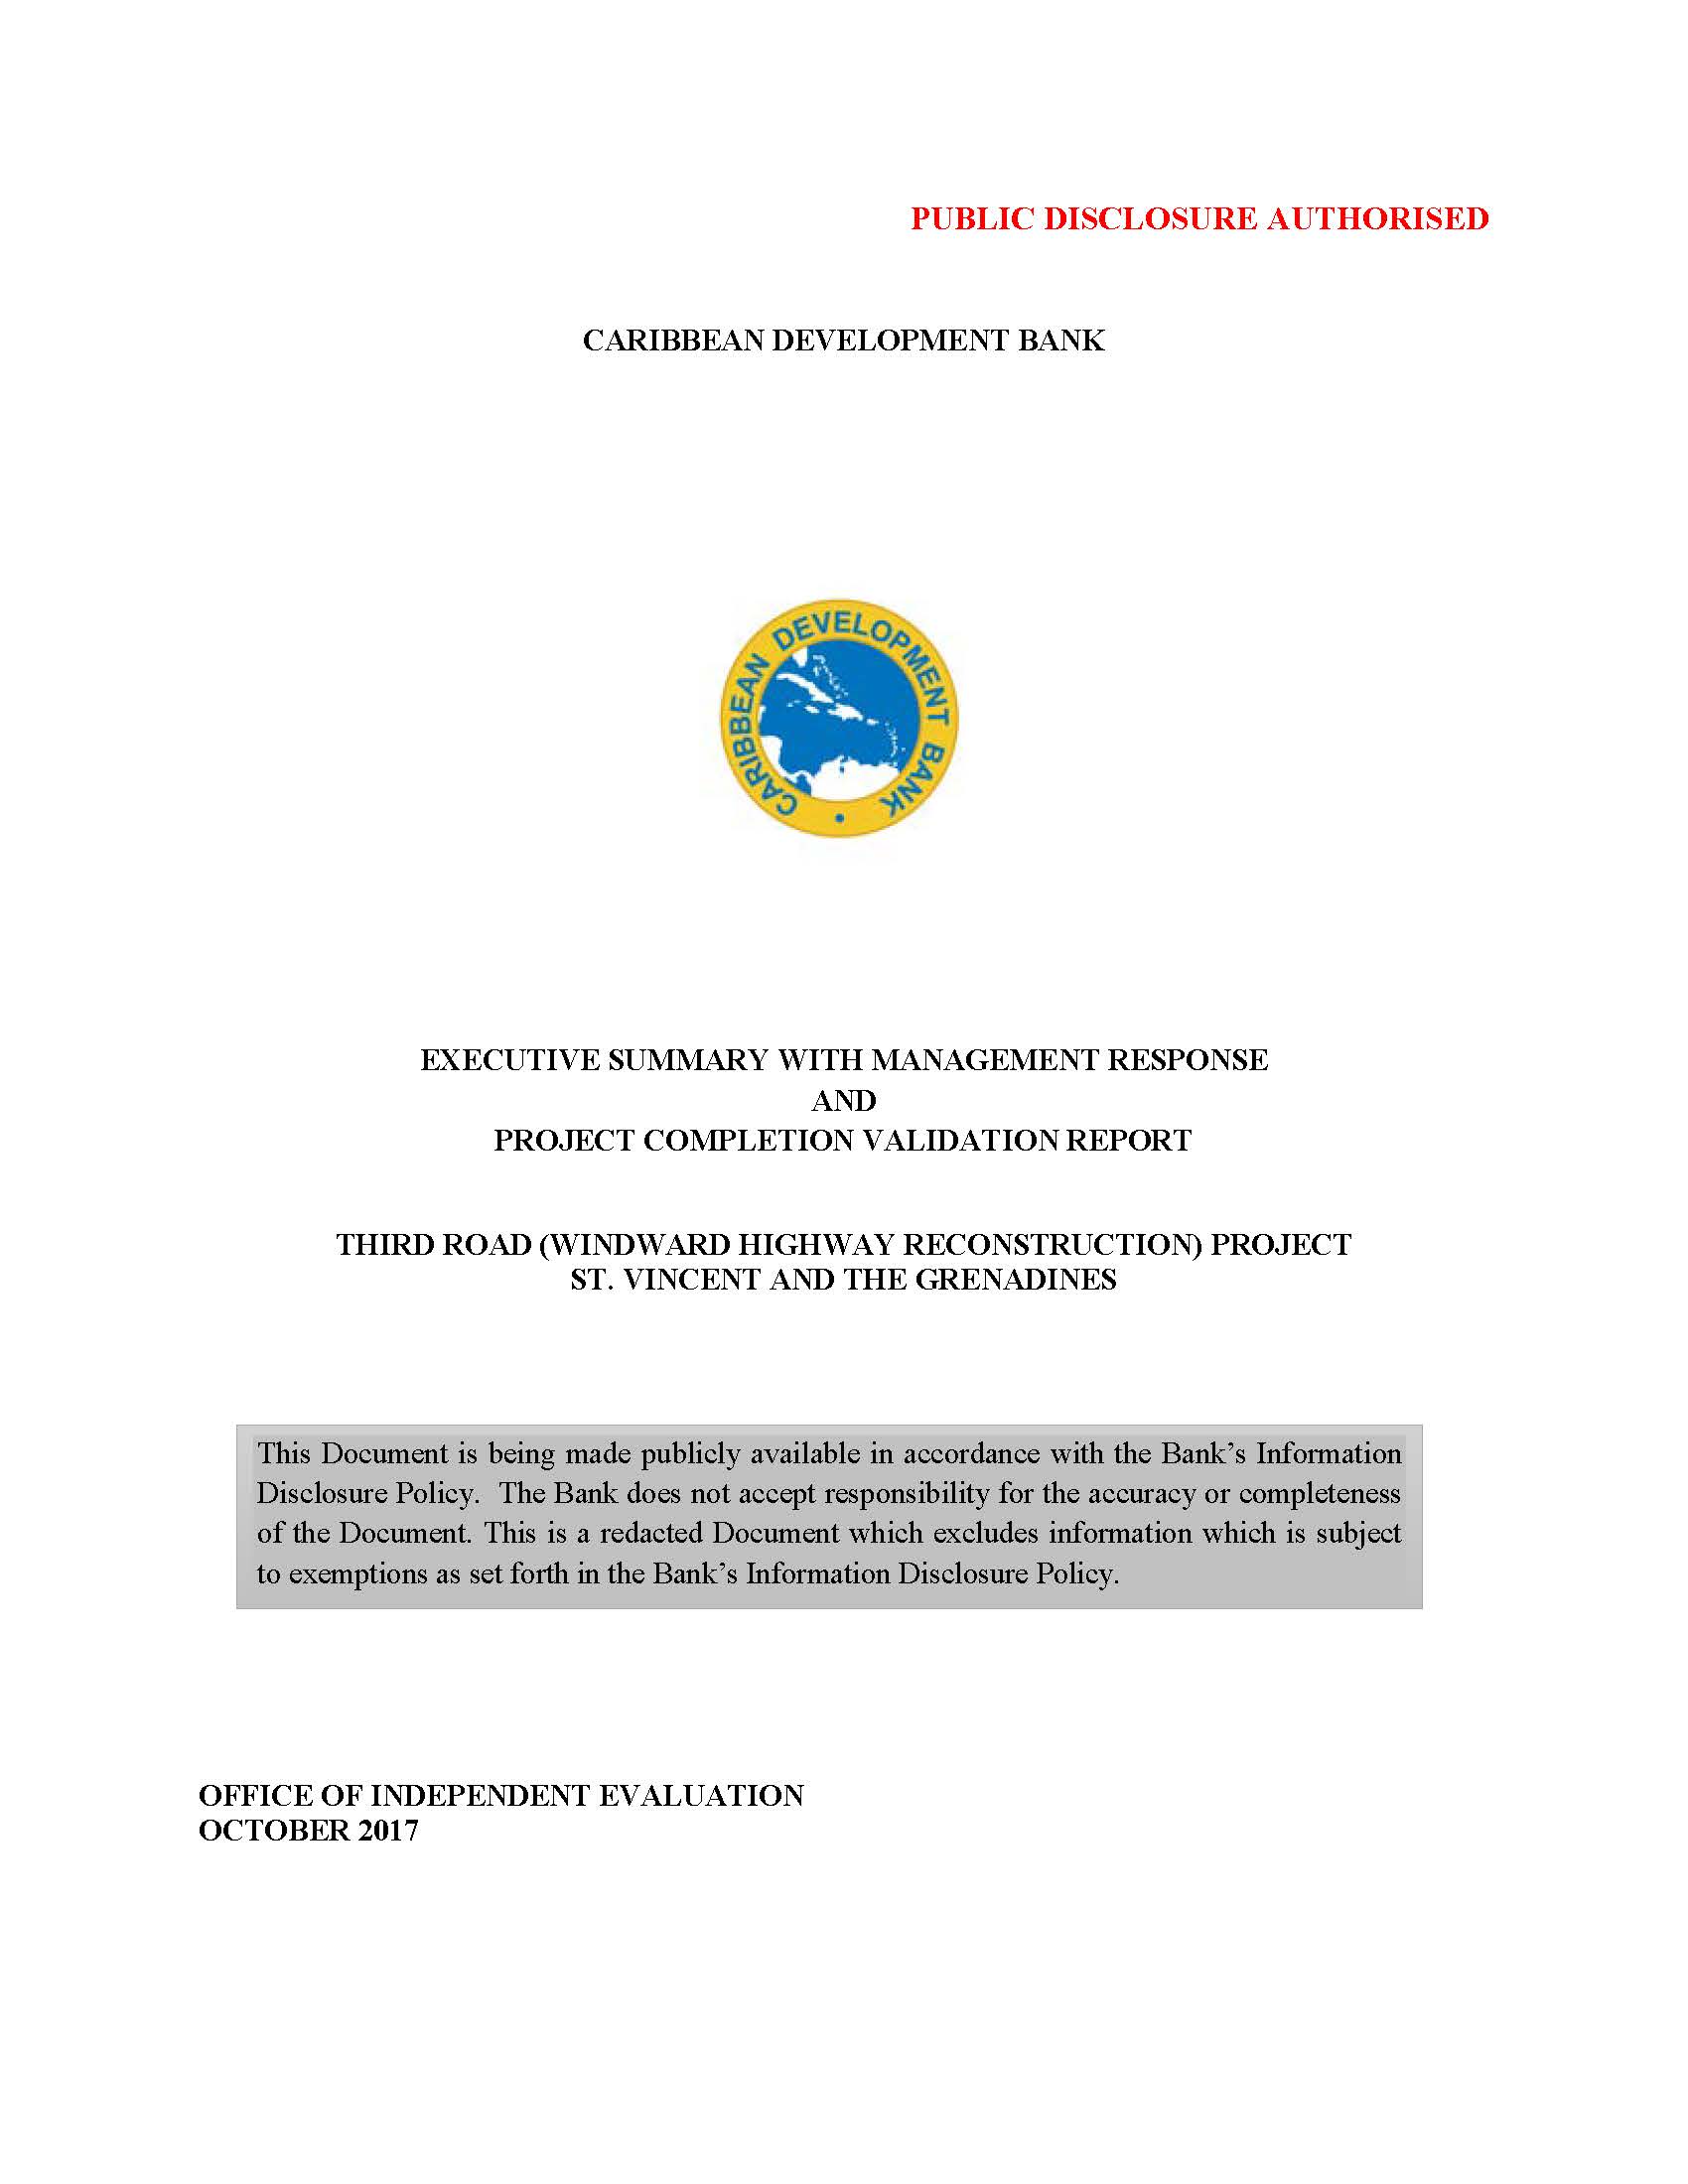 text-based cover with document title